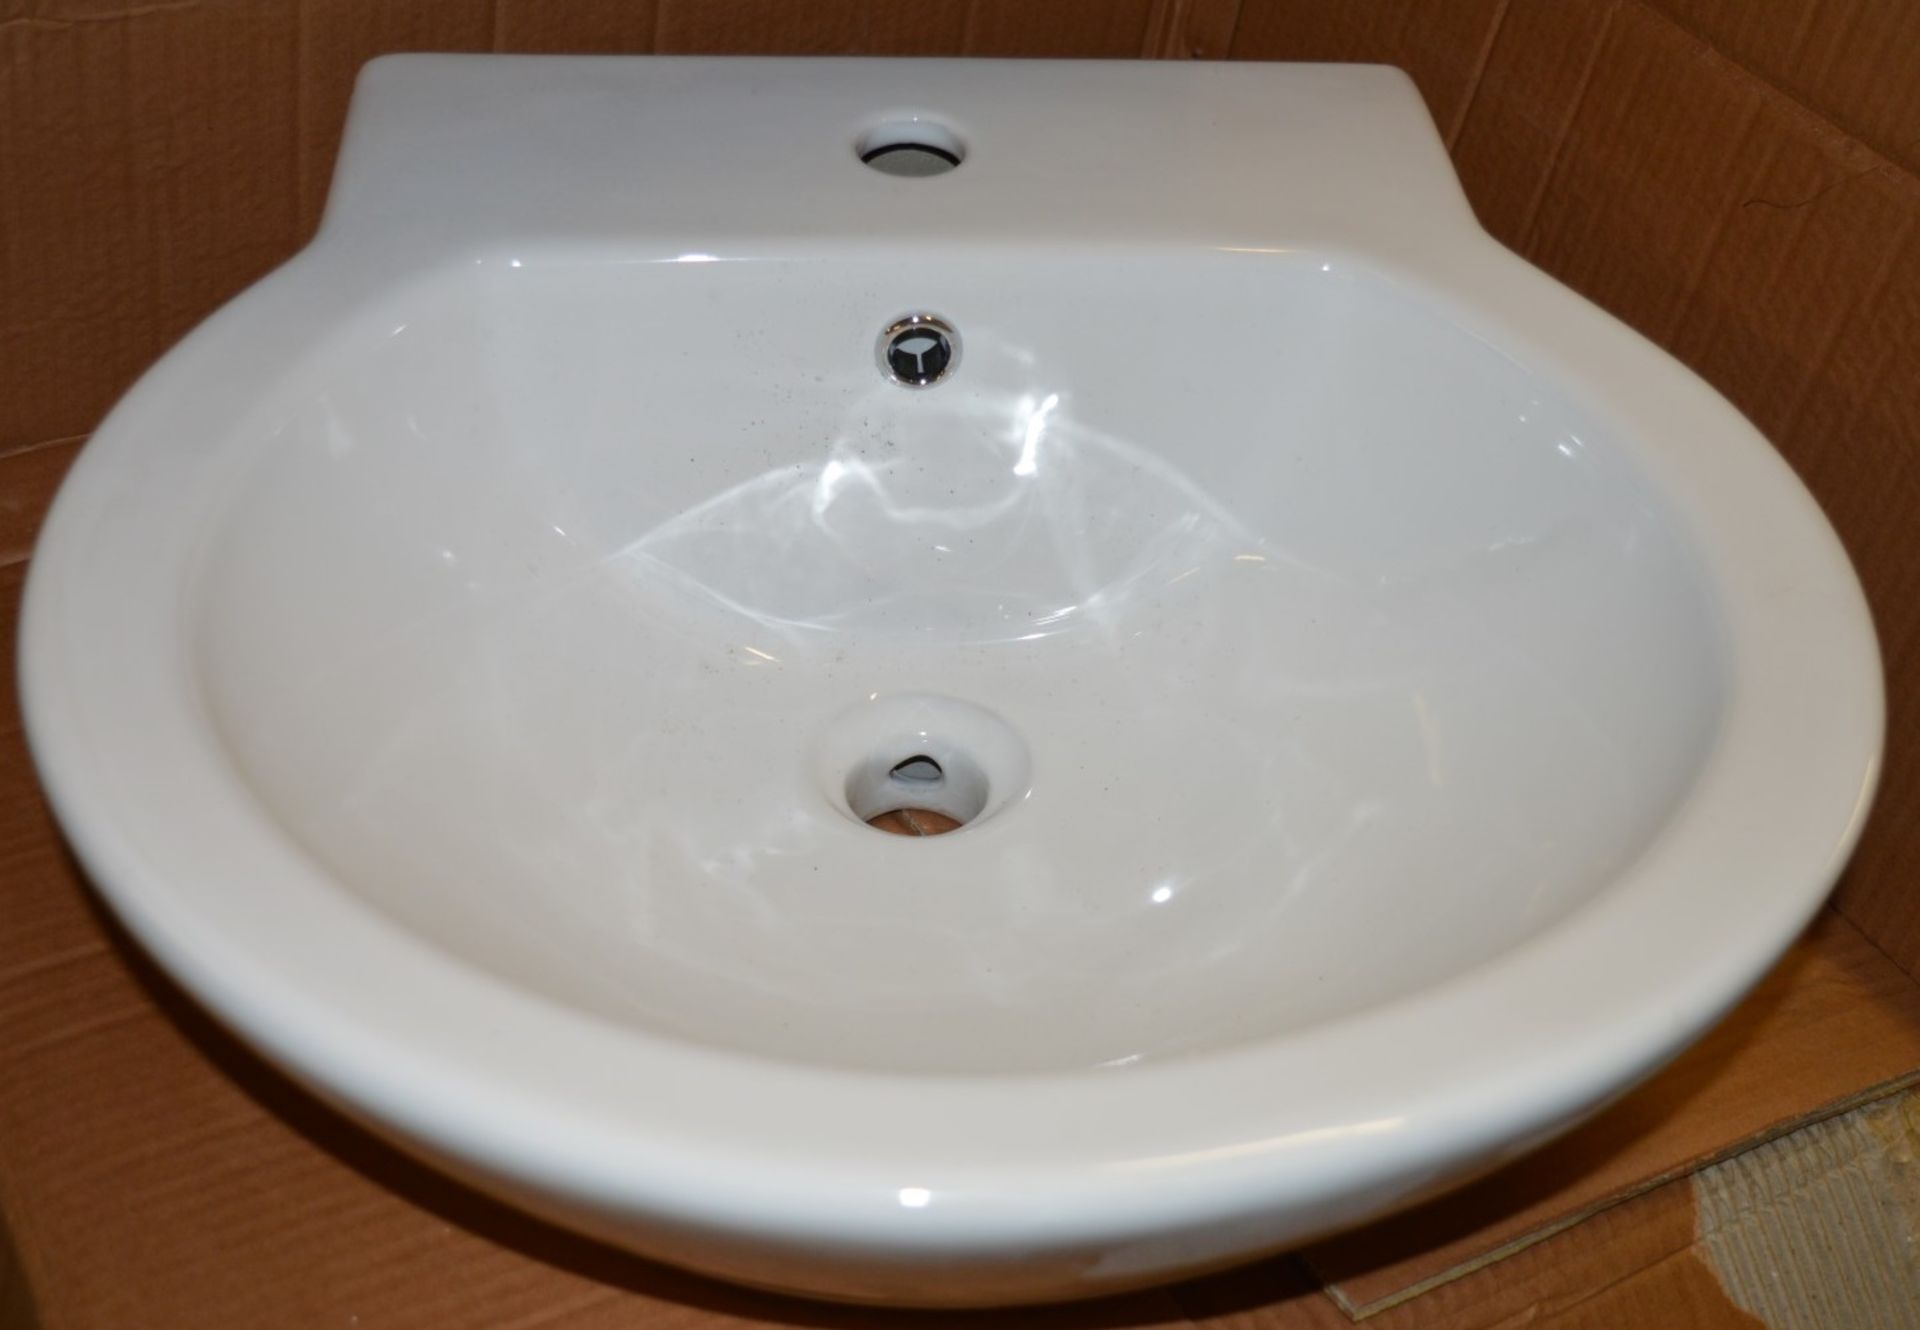 1 x Vogue Bathrooms DECO Single Tap Hole COUNTER TOP SINK BASIN - 500mm Width - Brand New Boxed - Image 3 of 4